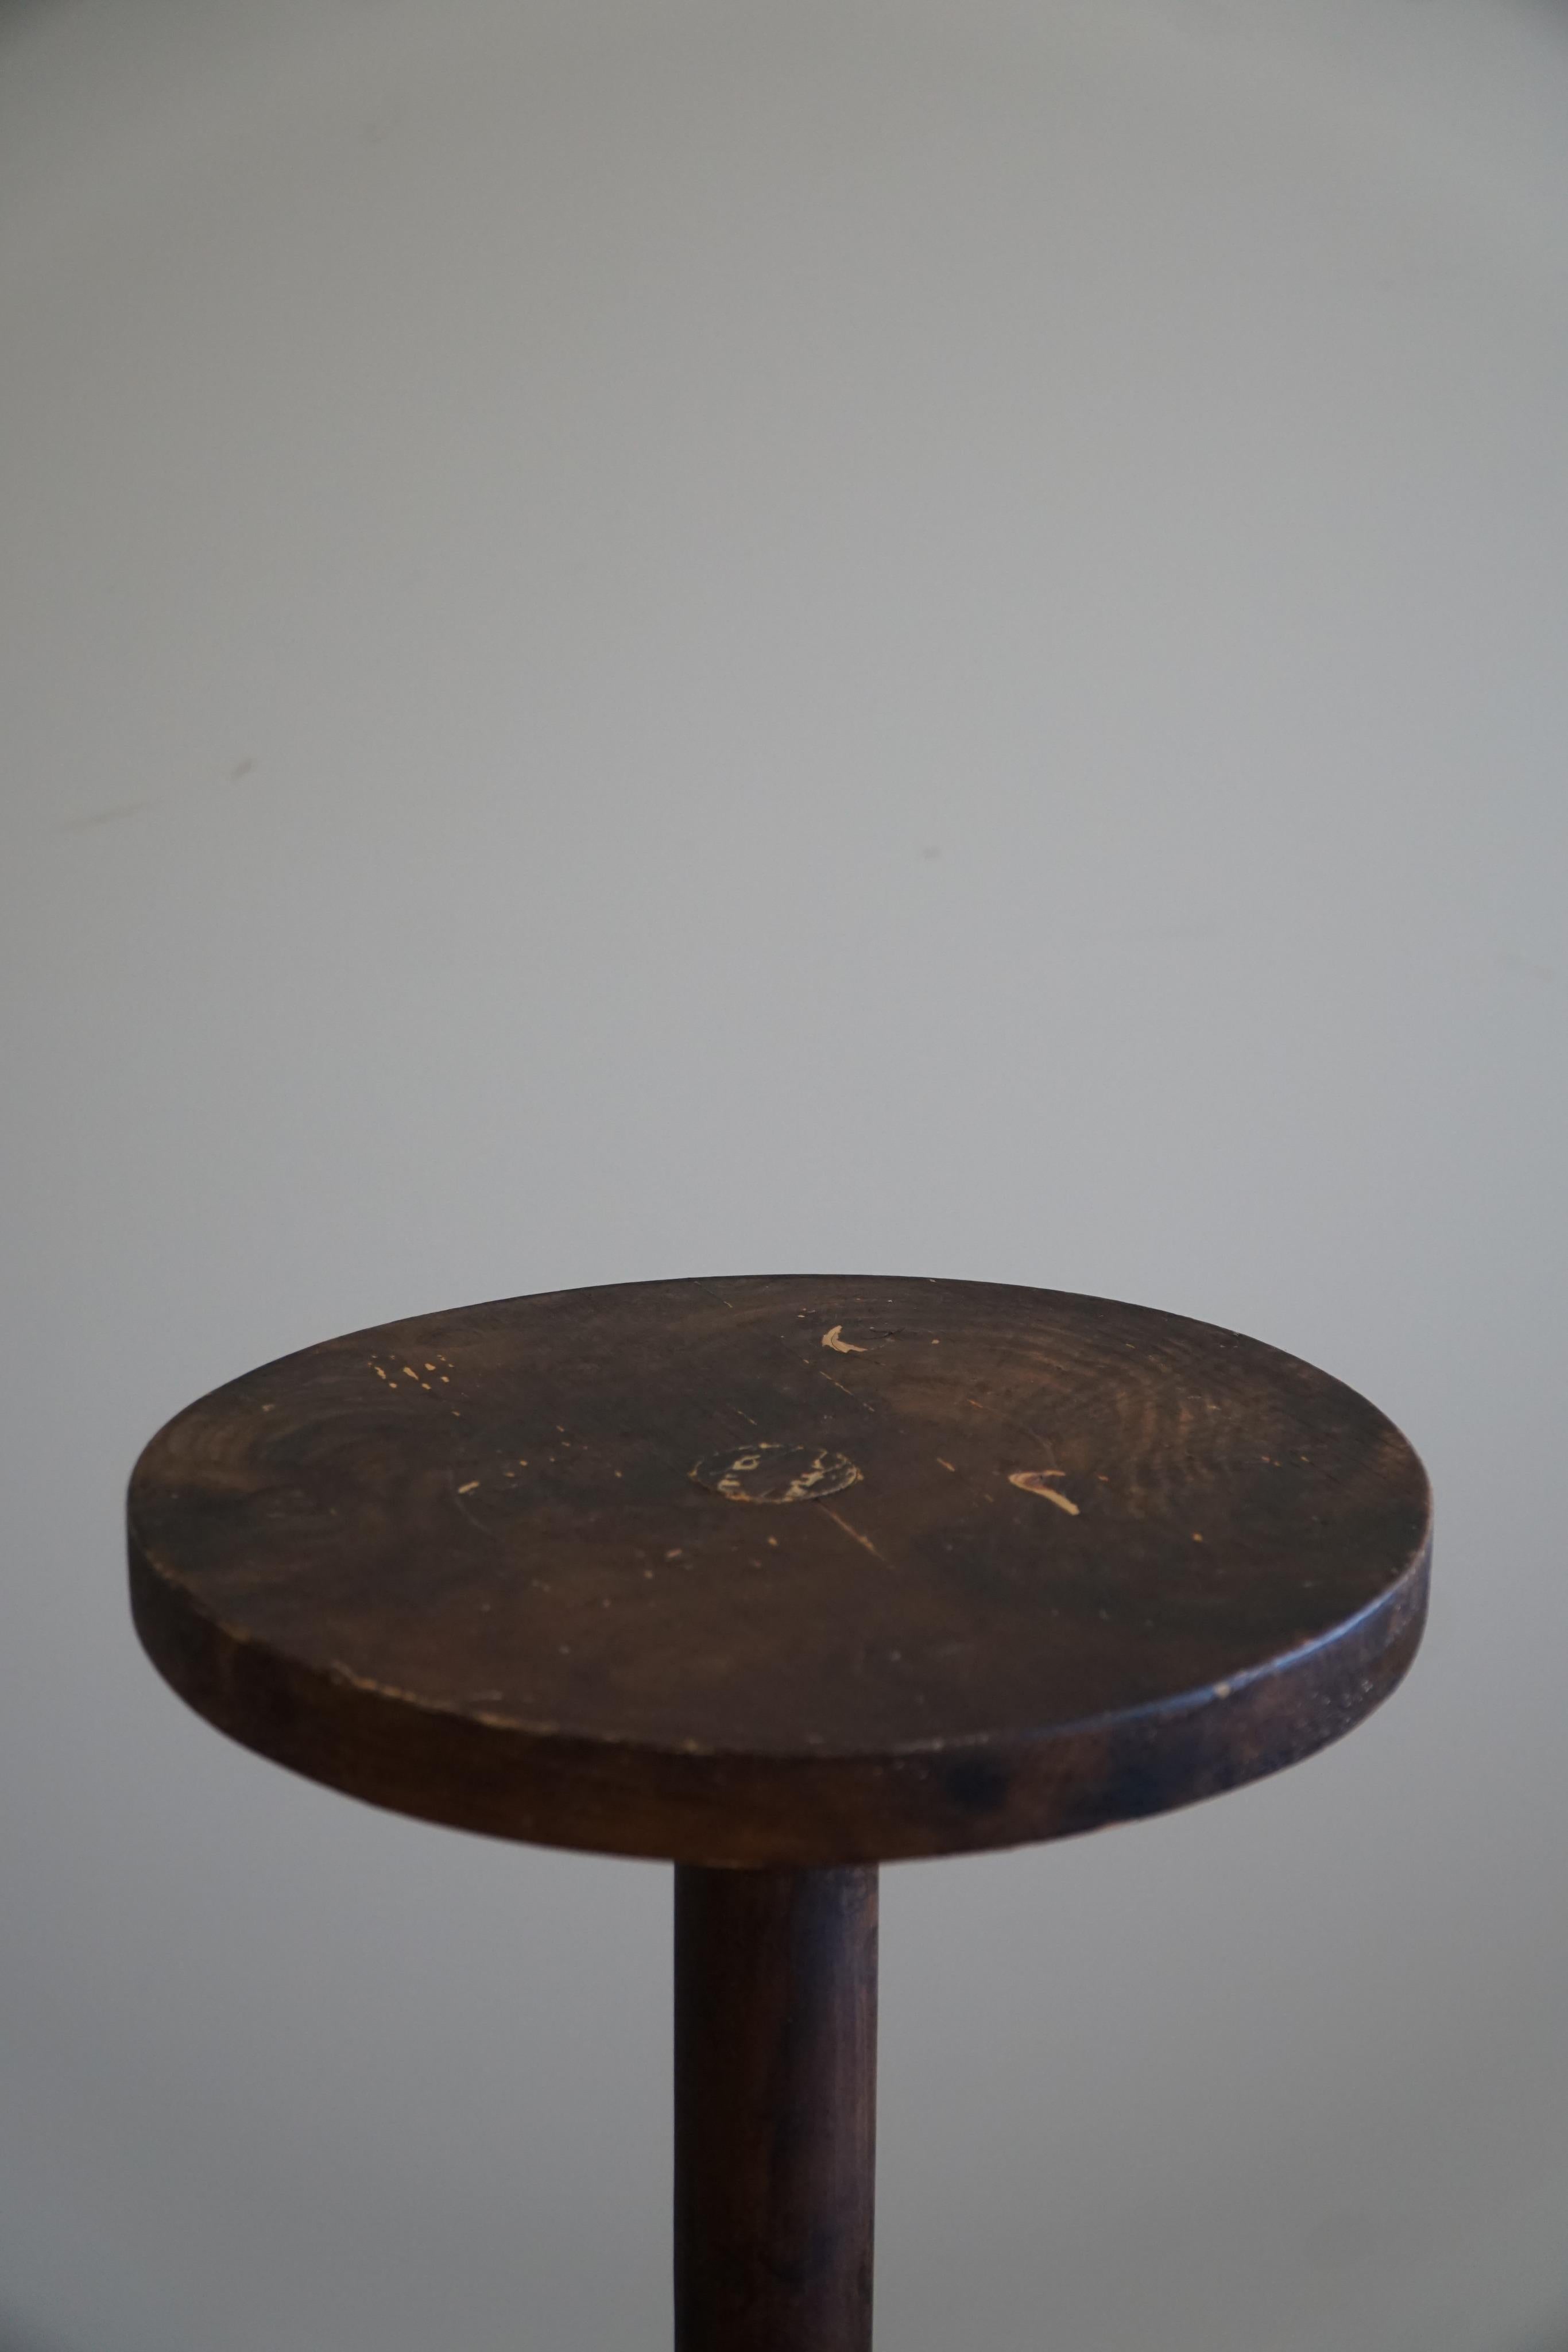 Decorative and Multifunctional Side Table / Pedestal, Danish Art Deco, 1940s For Sale 3